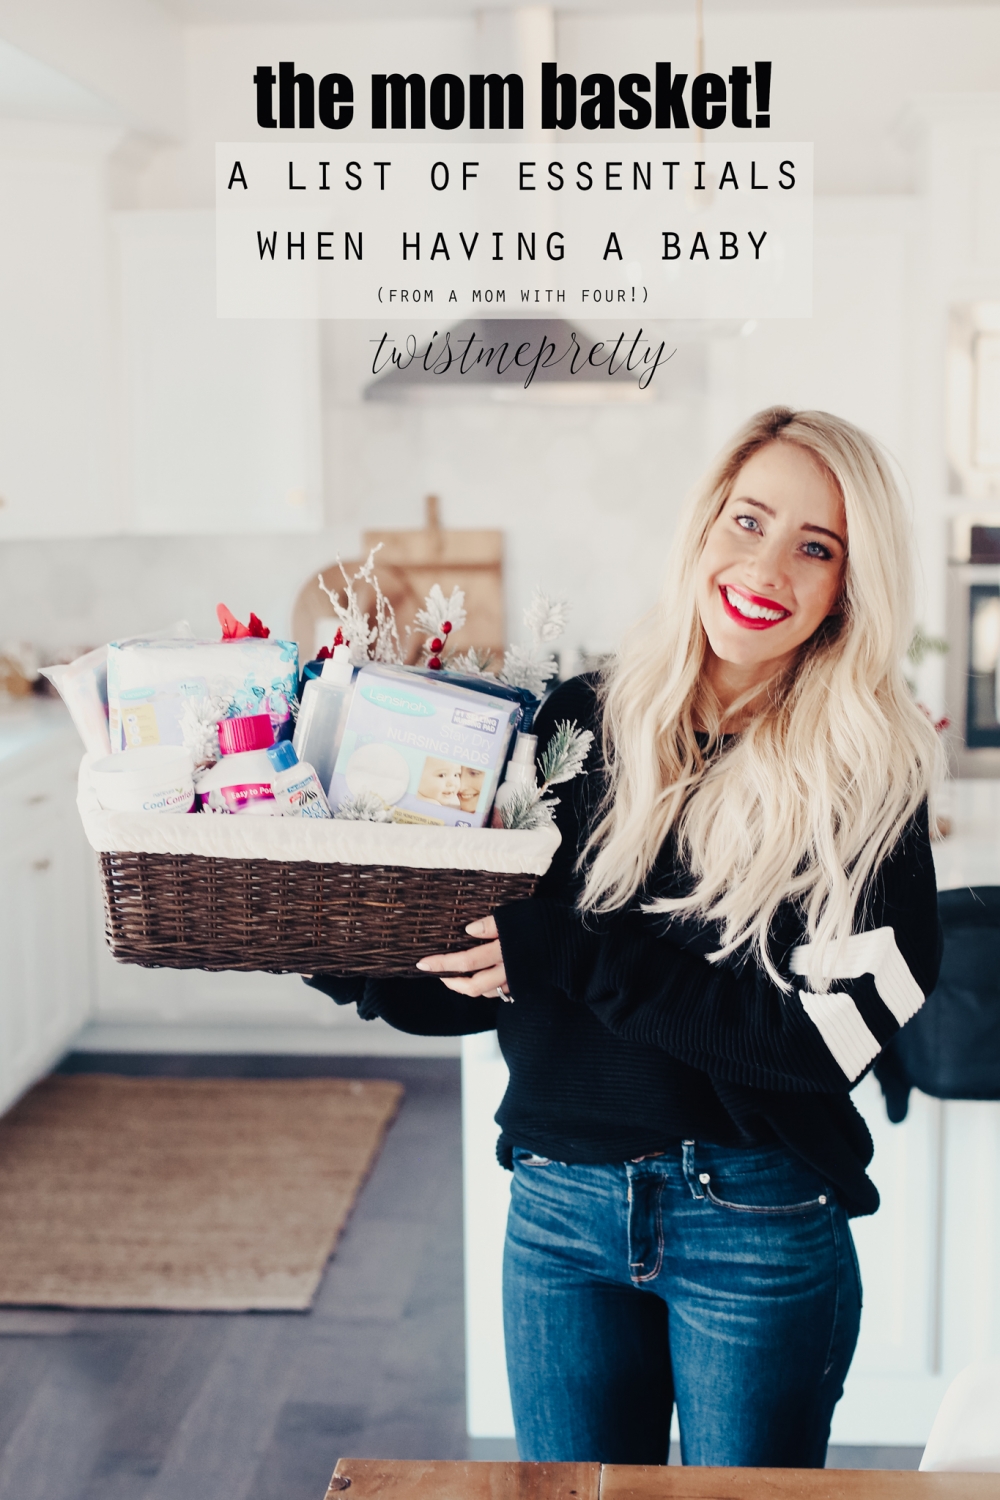 Magical Pants and My Postpartum and Nursing Essentials